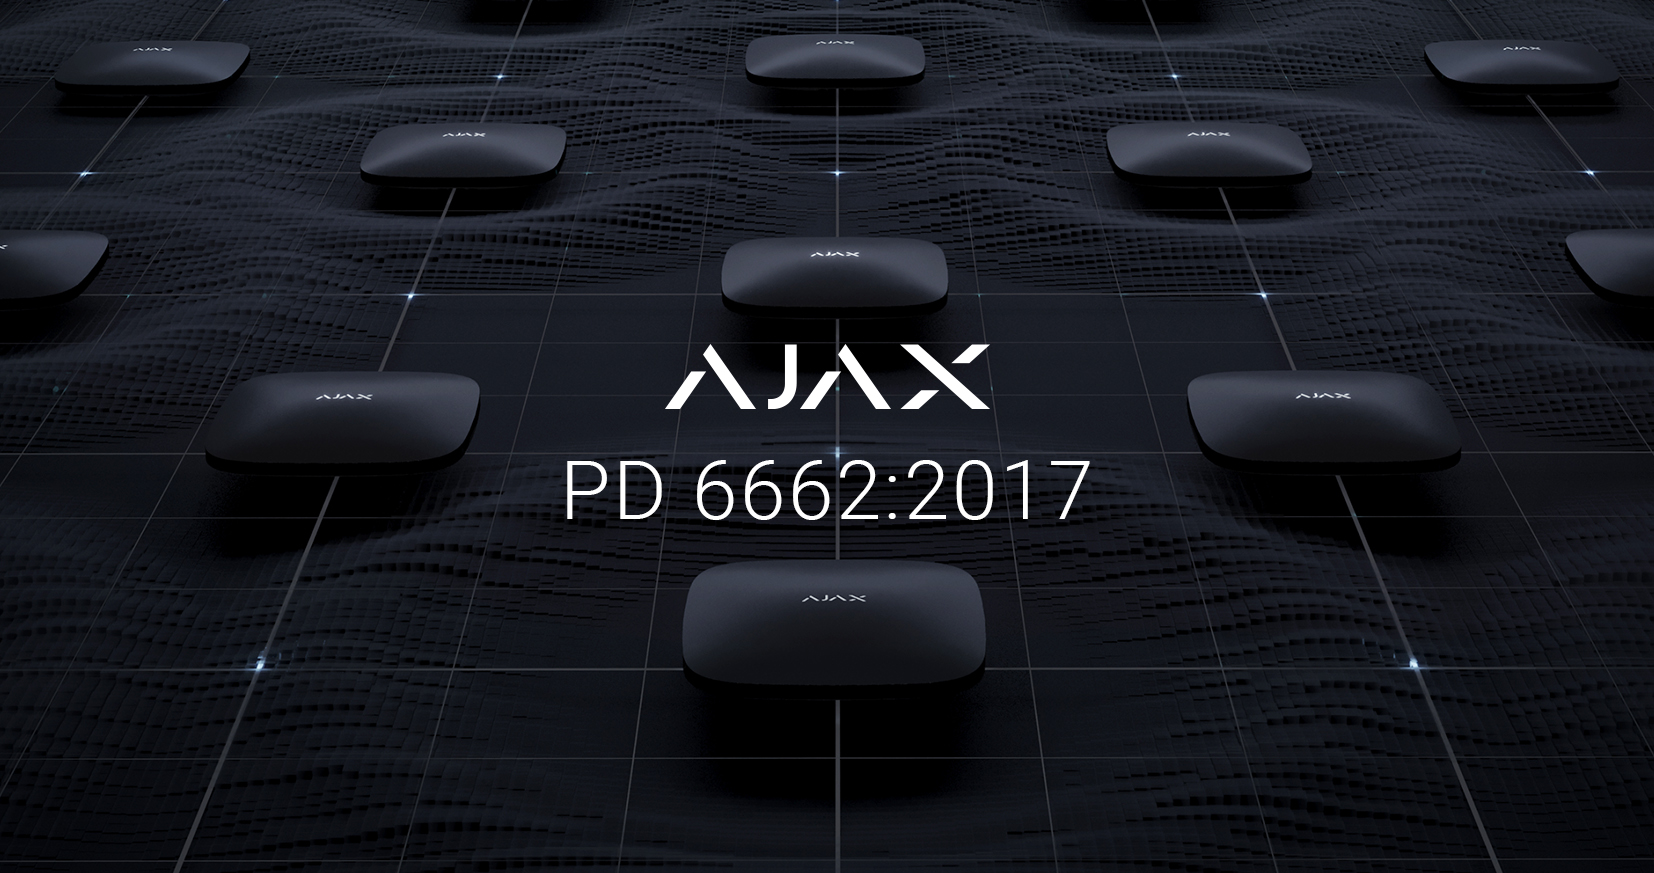 Ajax security system becomes compliant with the PD 6662:2017 standard